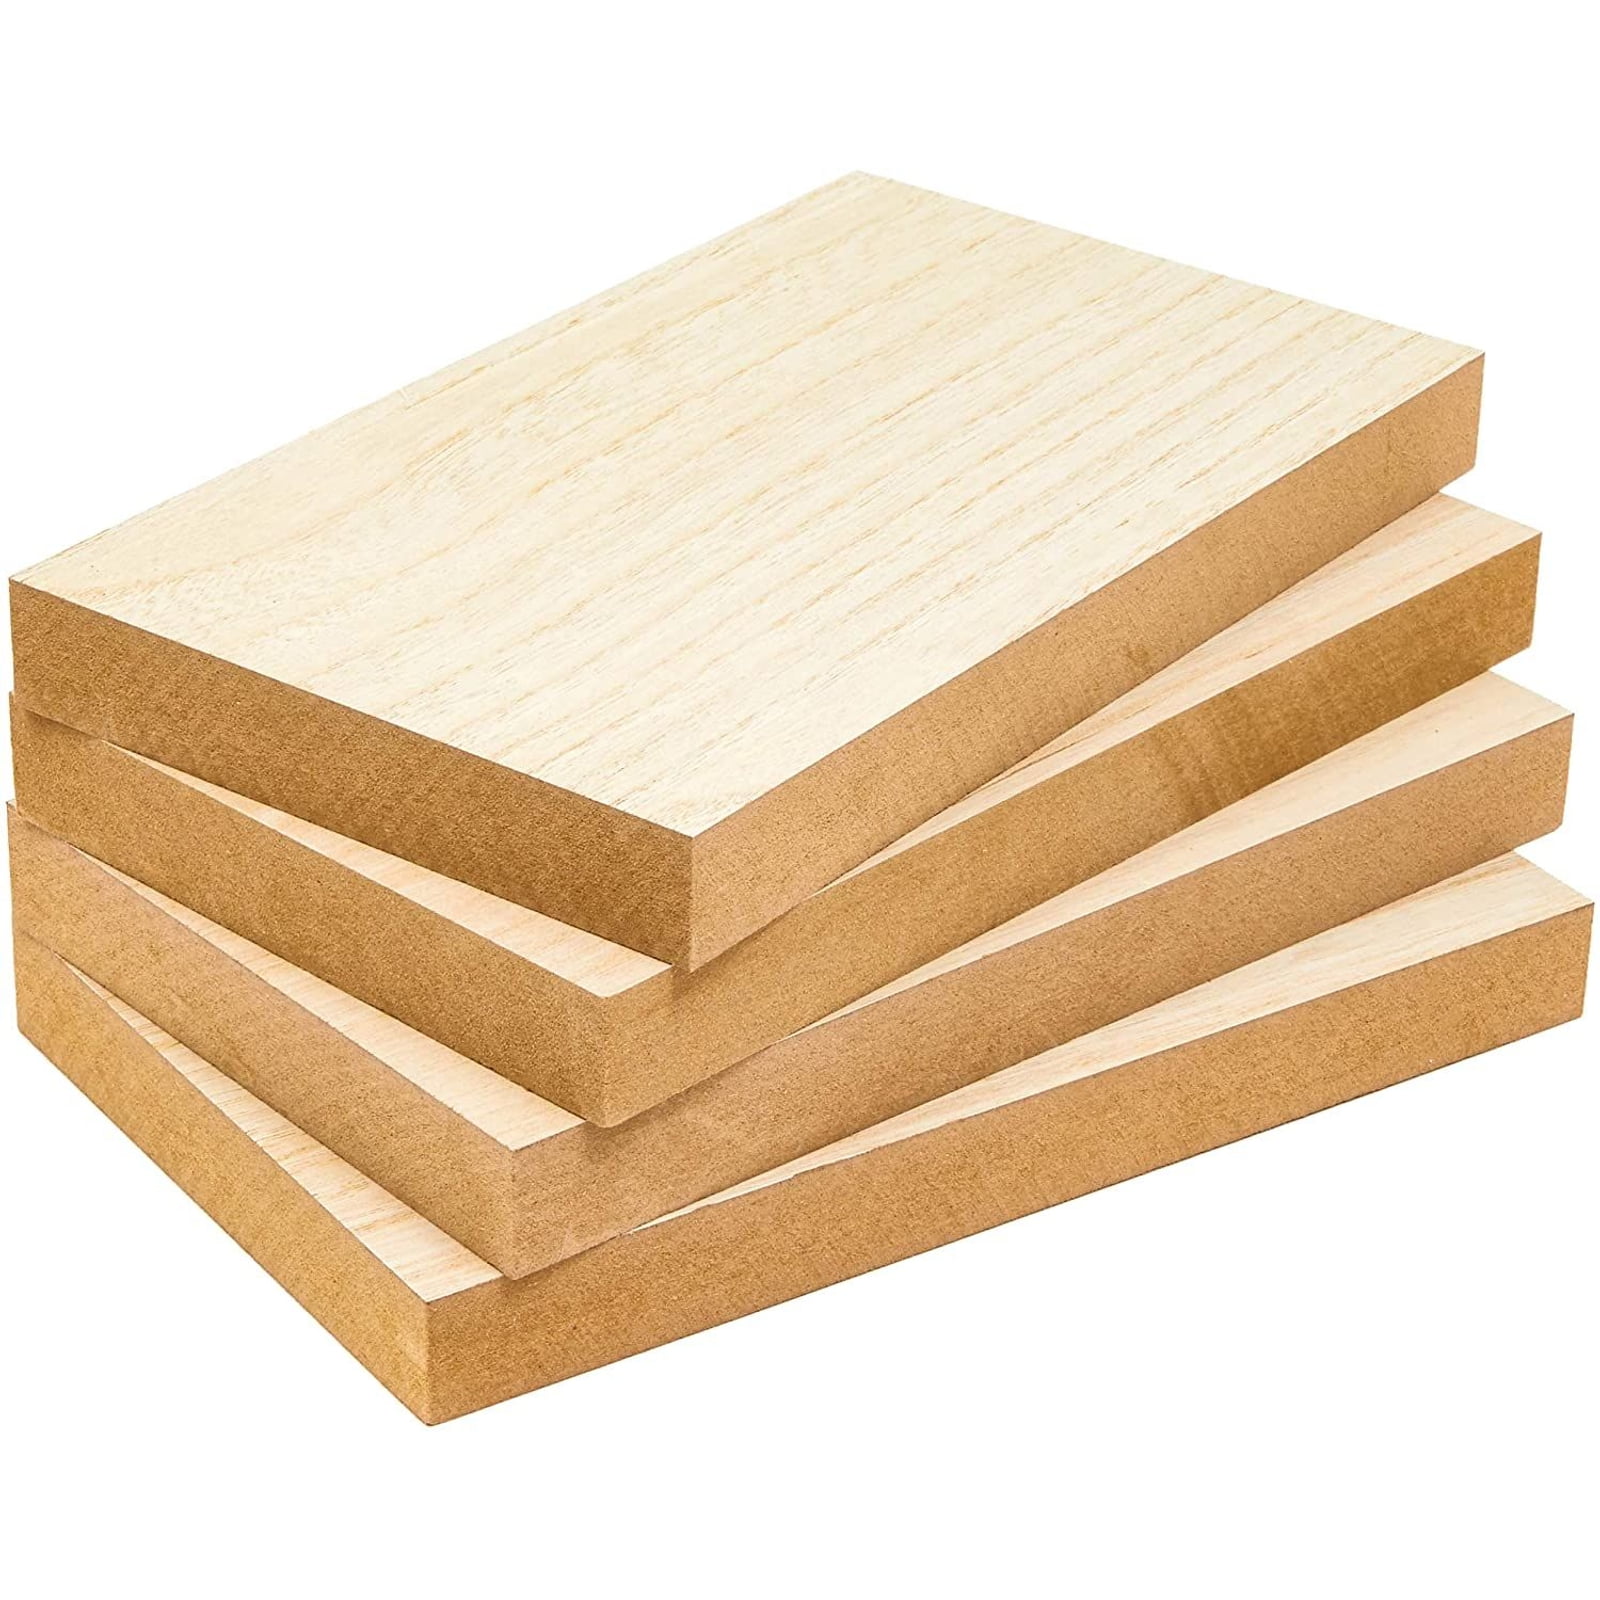 3mm 4 Piece Wooden Jigsaw Square Unpainted MDF Craft Blanks Wood 